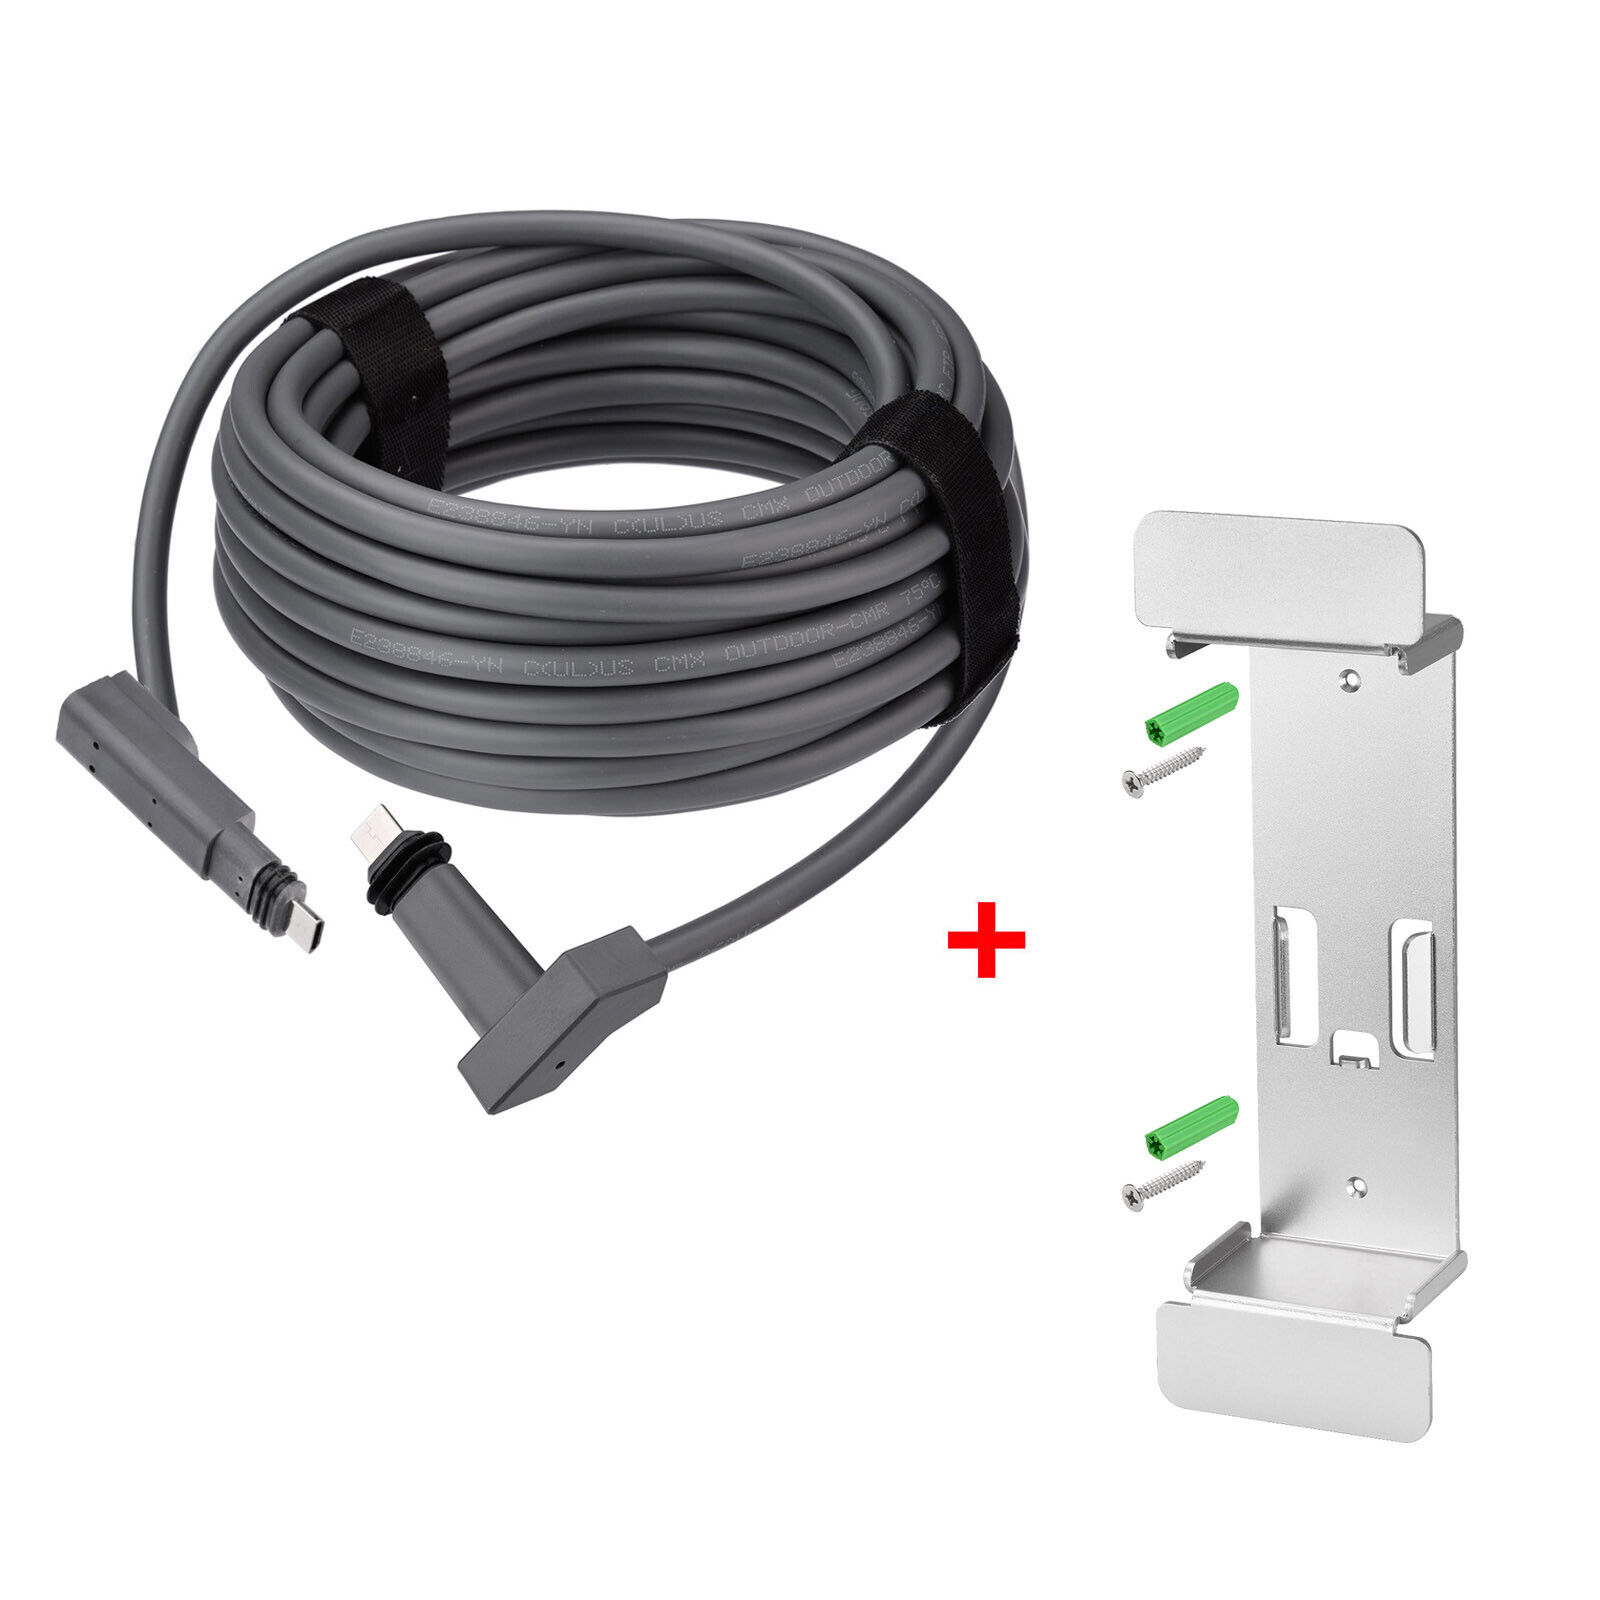 For Starlink Rectangular Satellite V2 30Ft Replacement Cable+Wall mounted storag